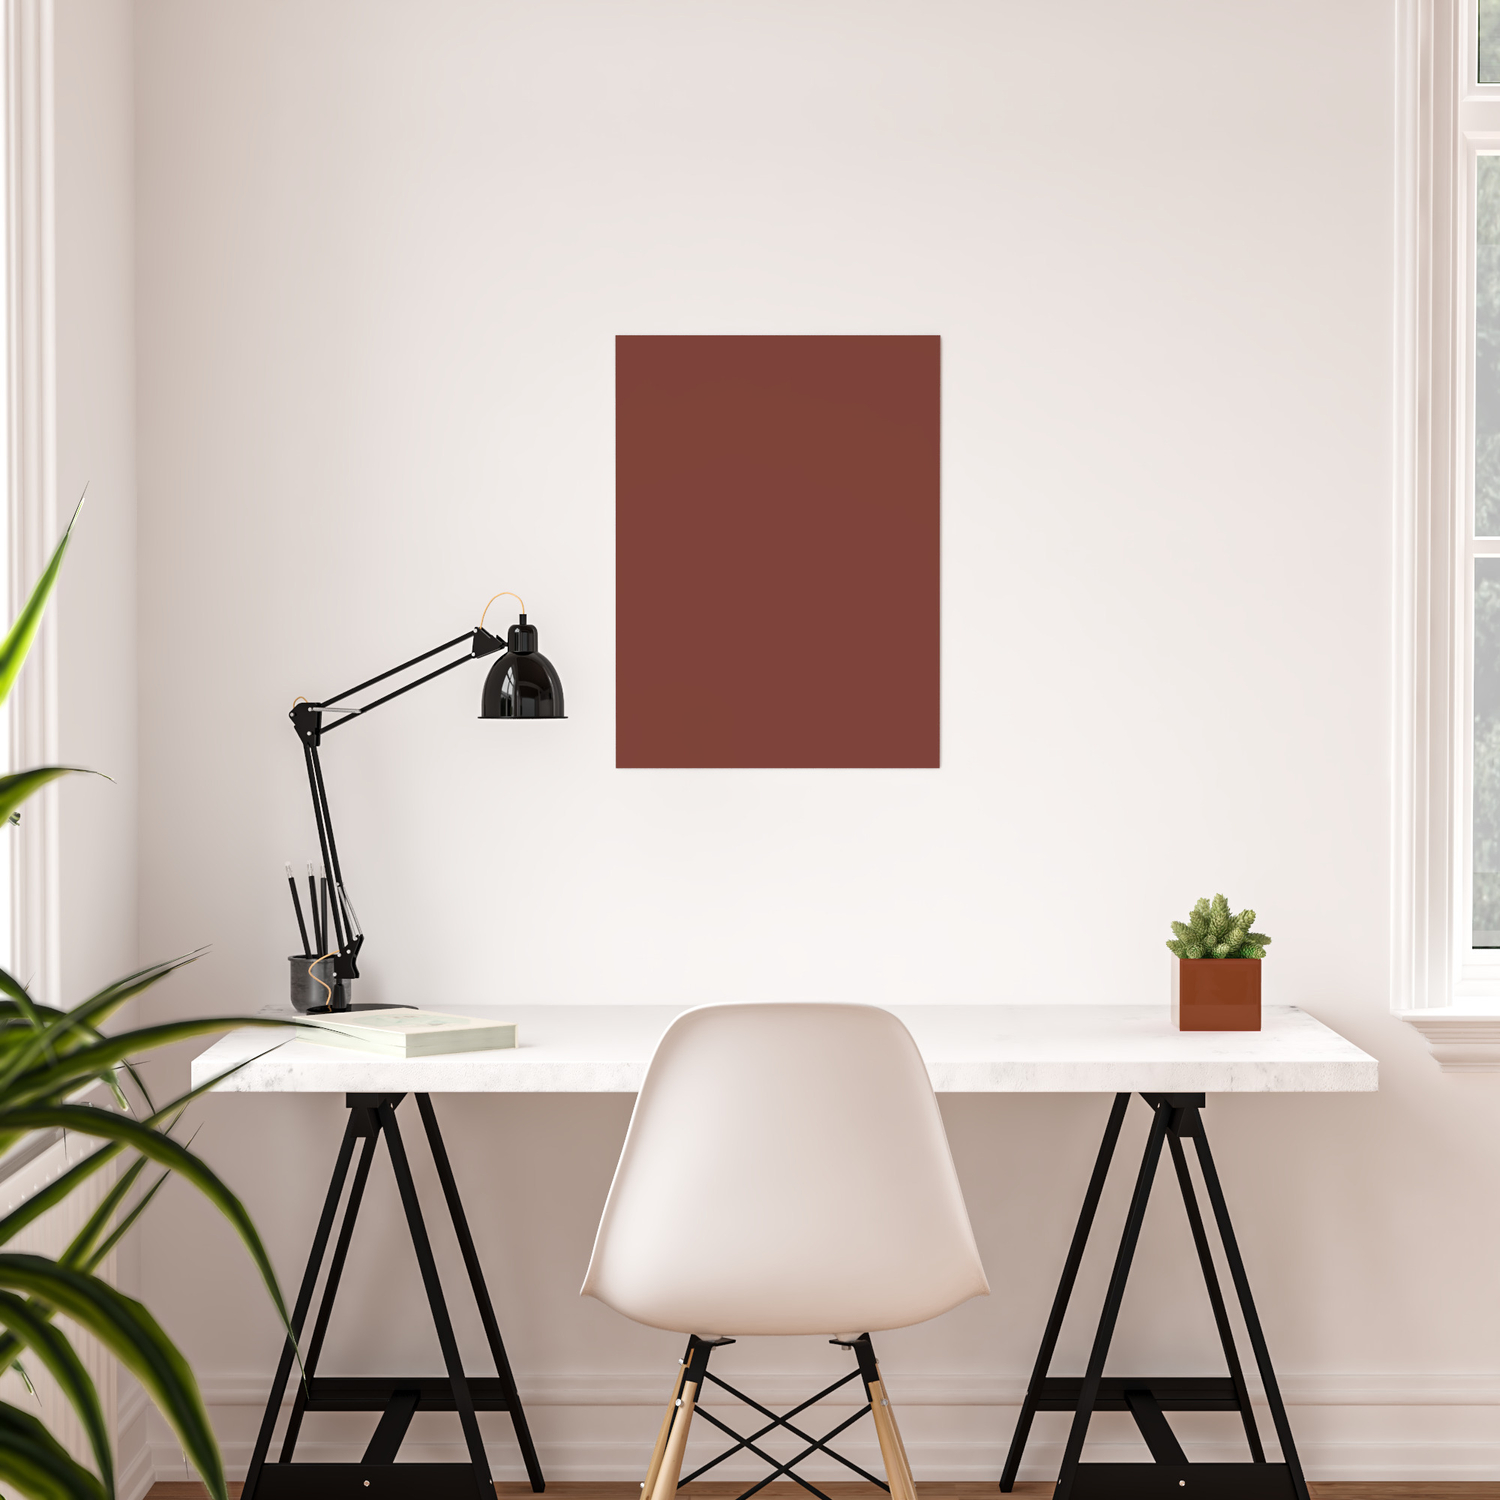 Sherwin Williams Trending Colors Of 2019 Rustic Red Sw 7593 Solid Color Poster By Simplysolids